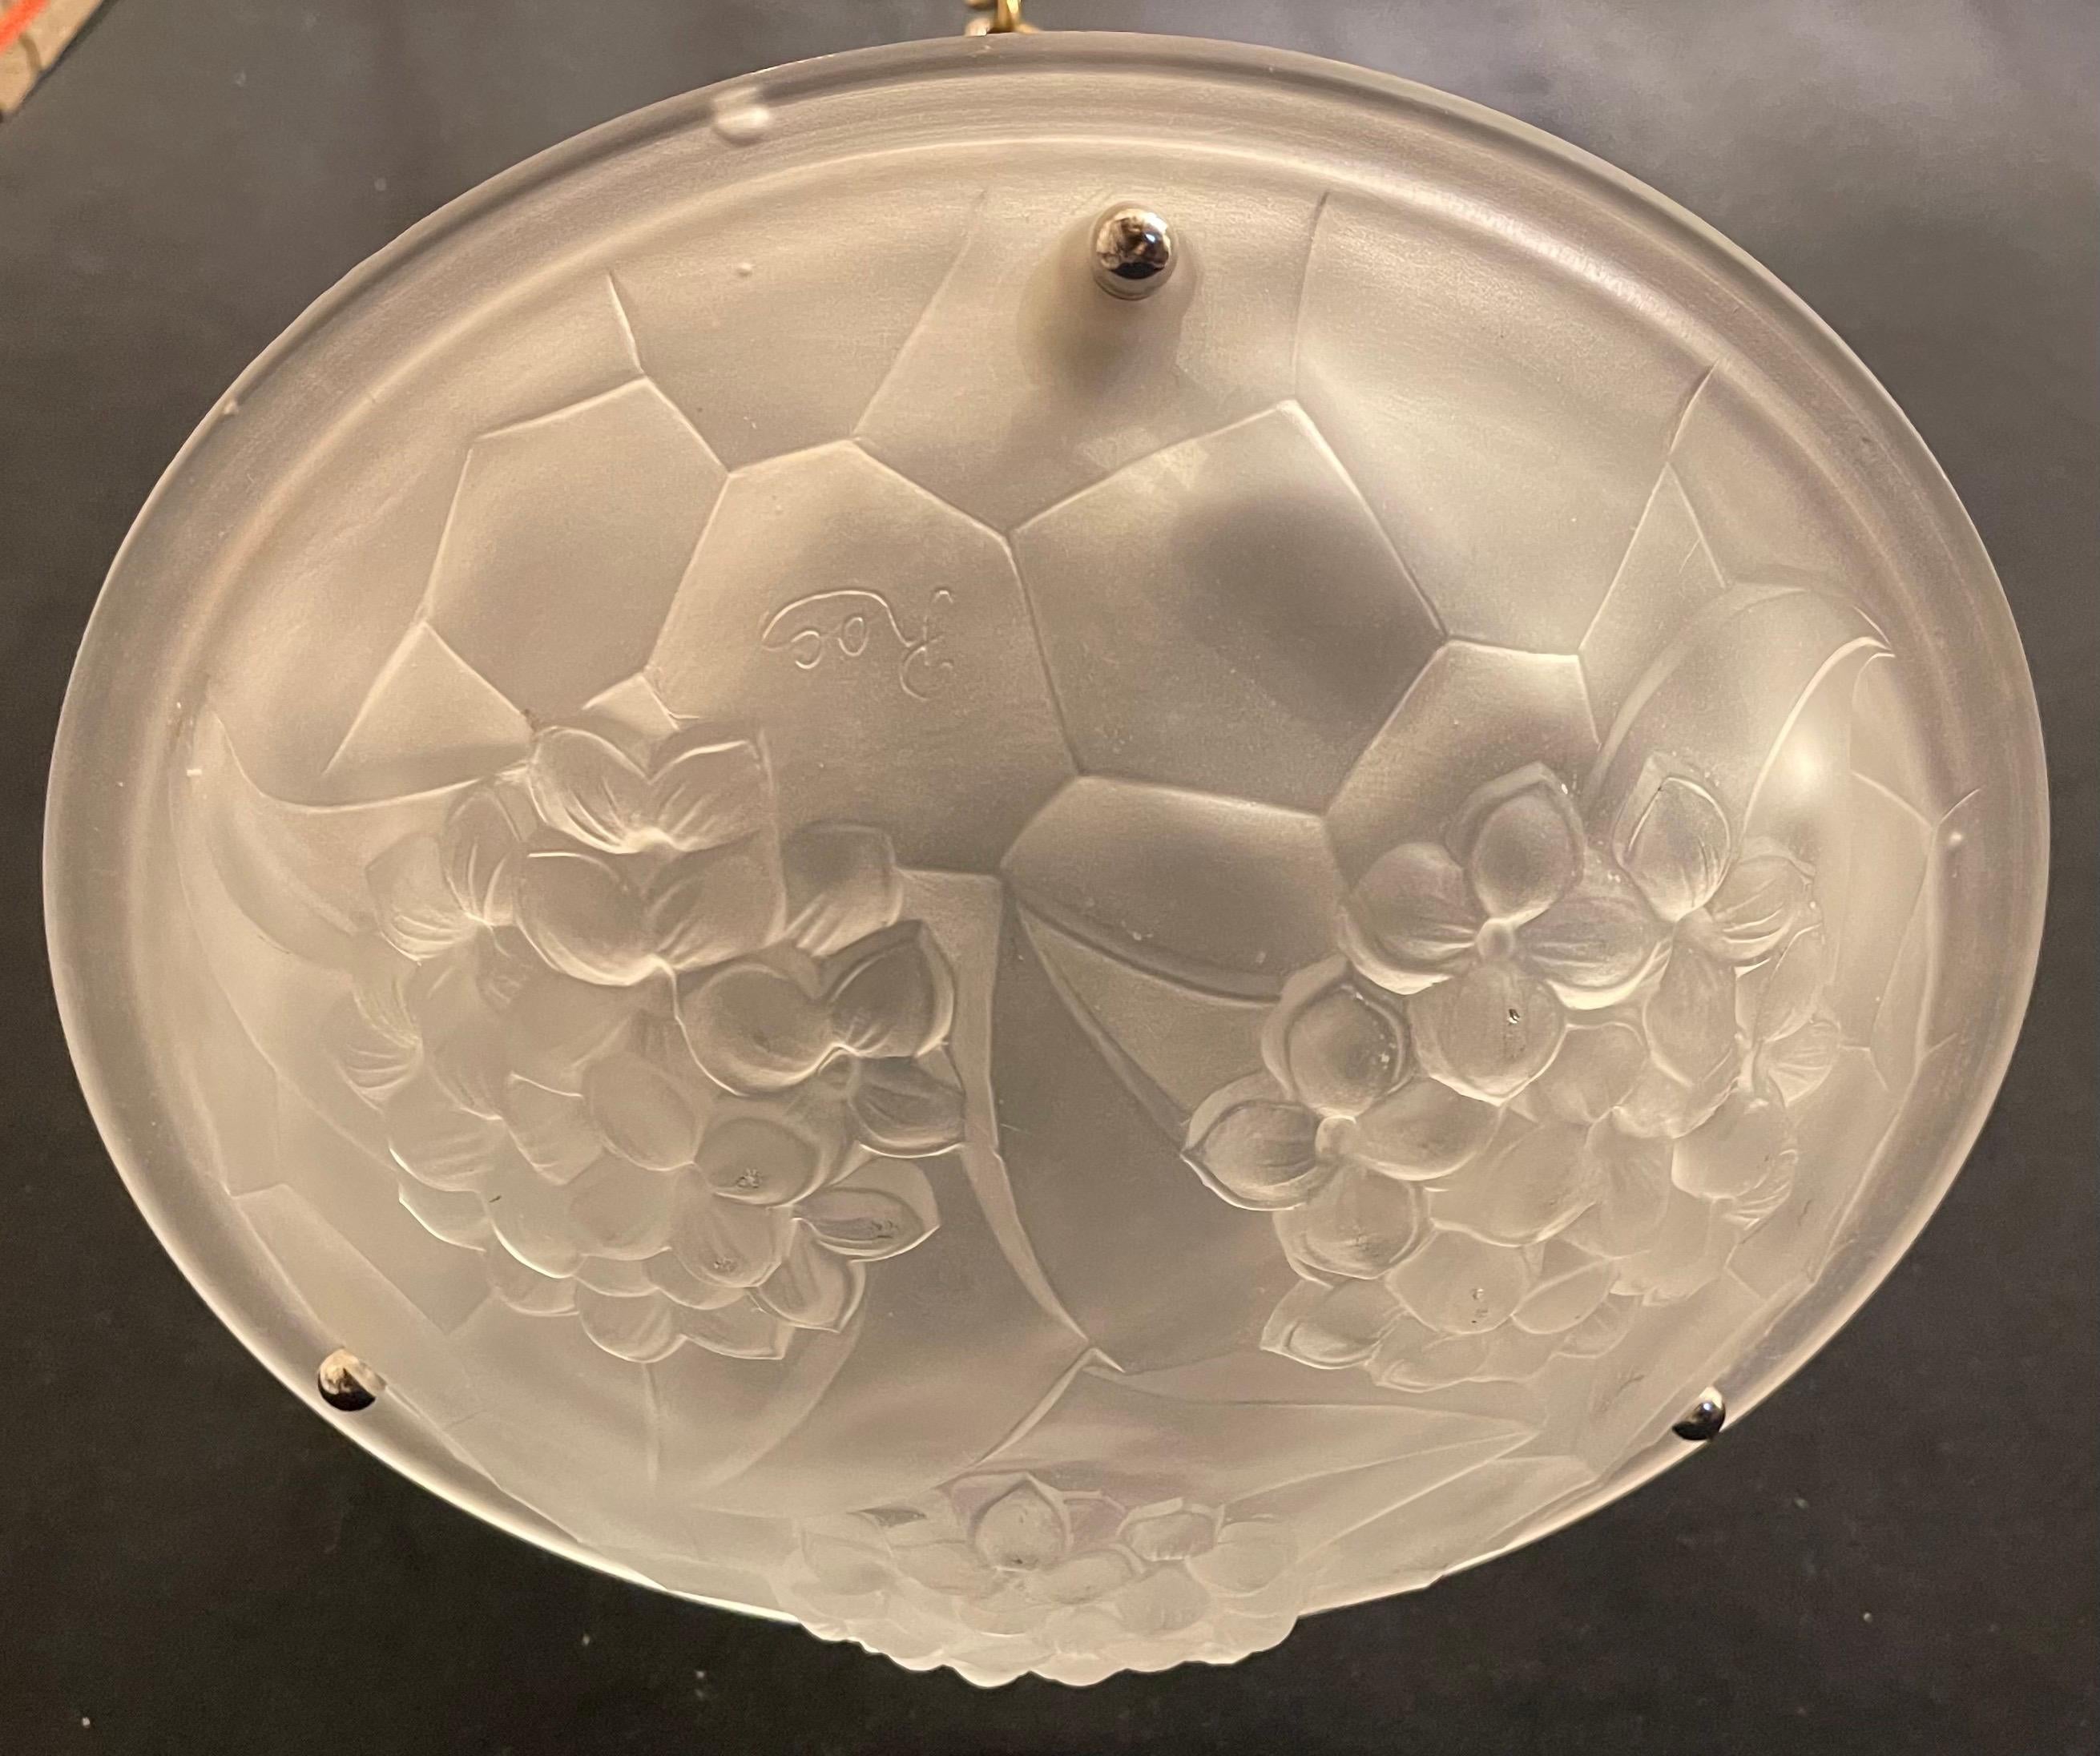 A wonderful mid century Art Deco glass bowl with polished nickel light fixture having 3 internal candelabra sockets, this pendent is adjustable in height.